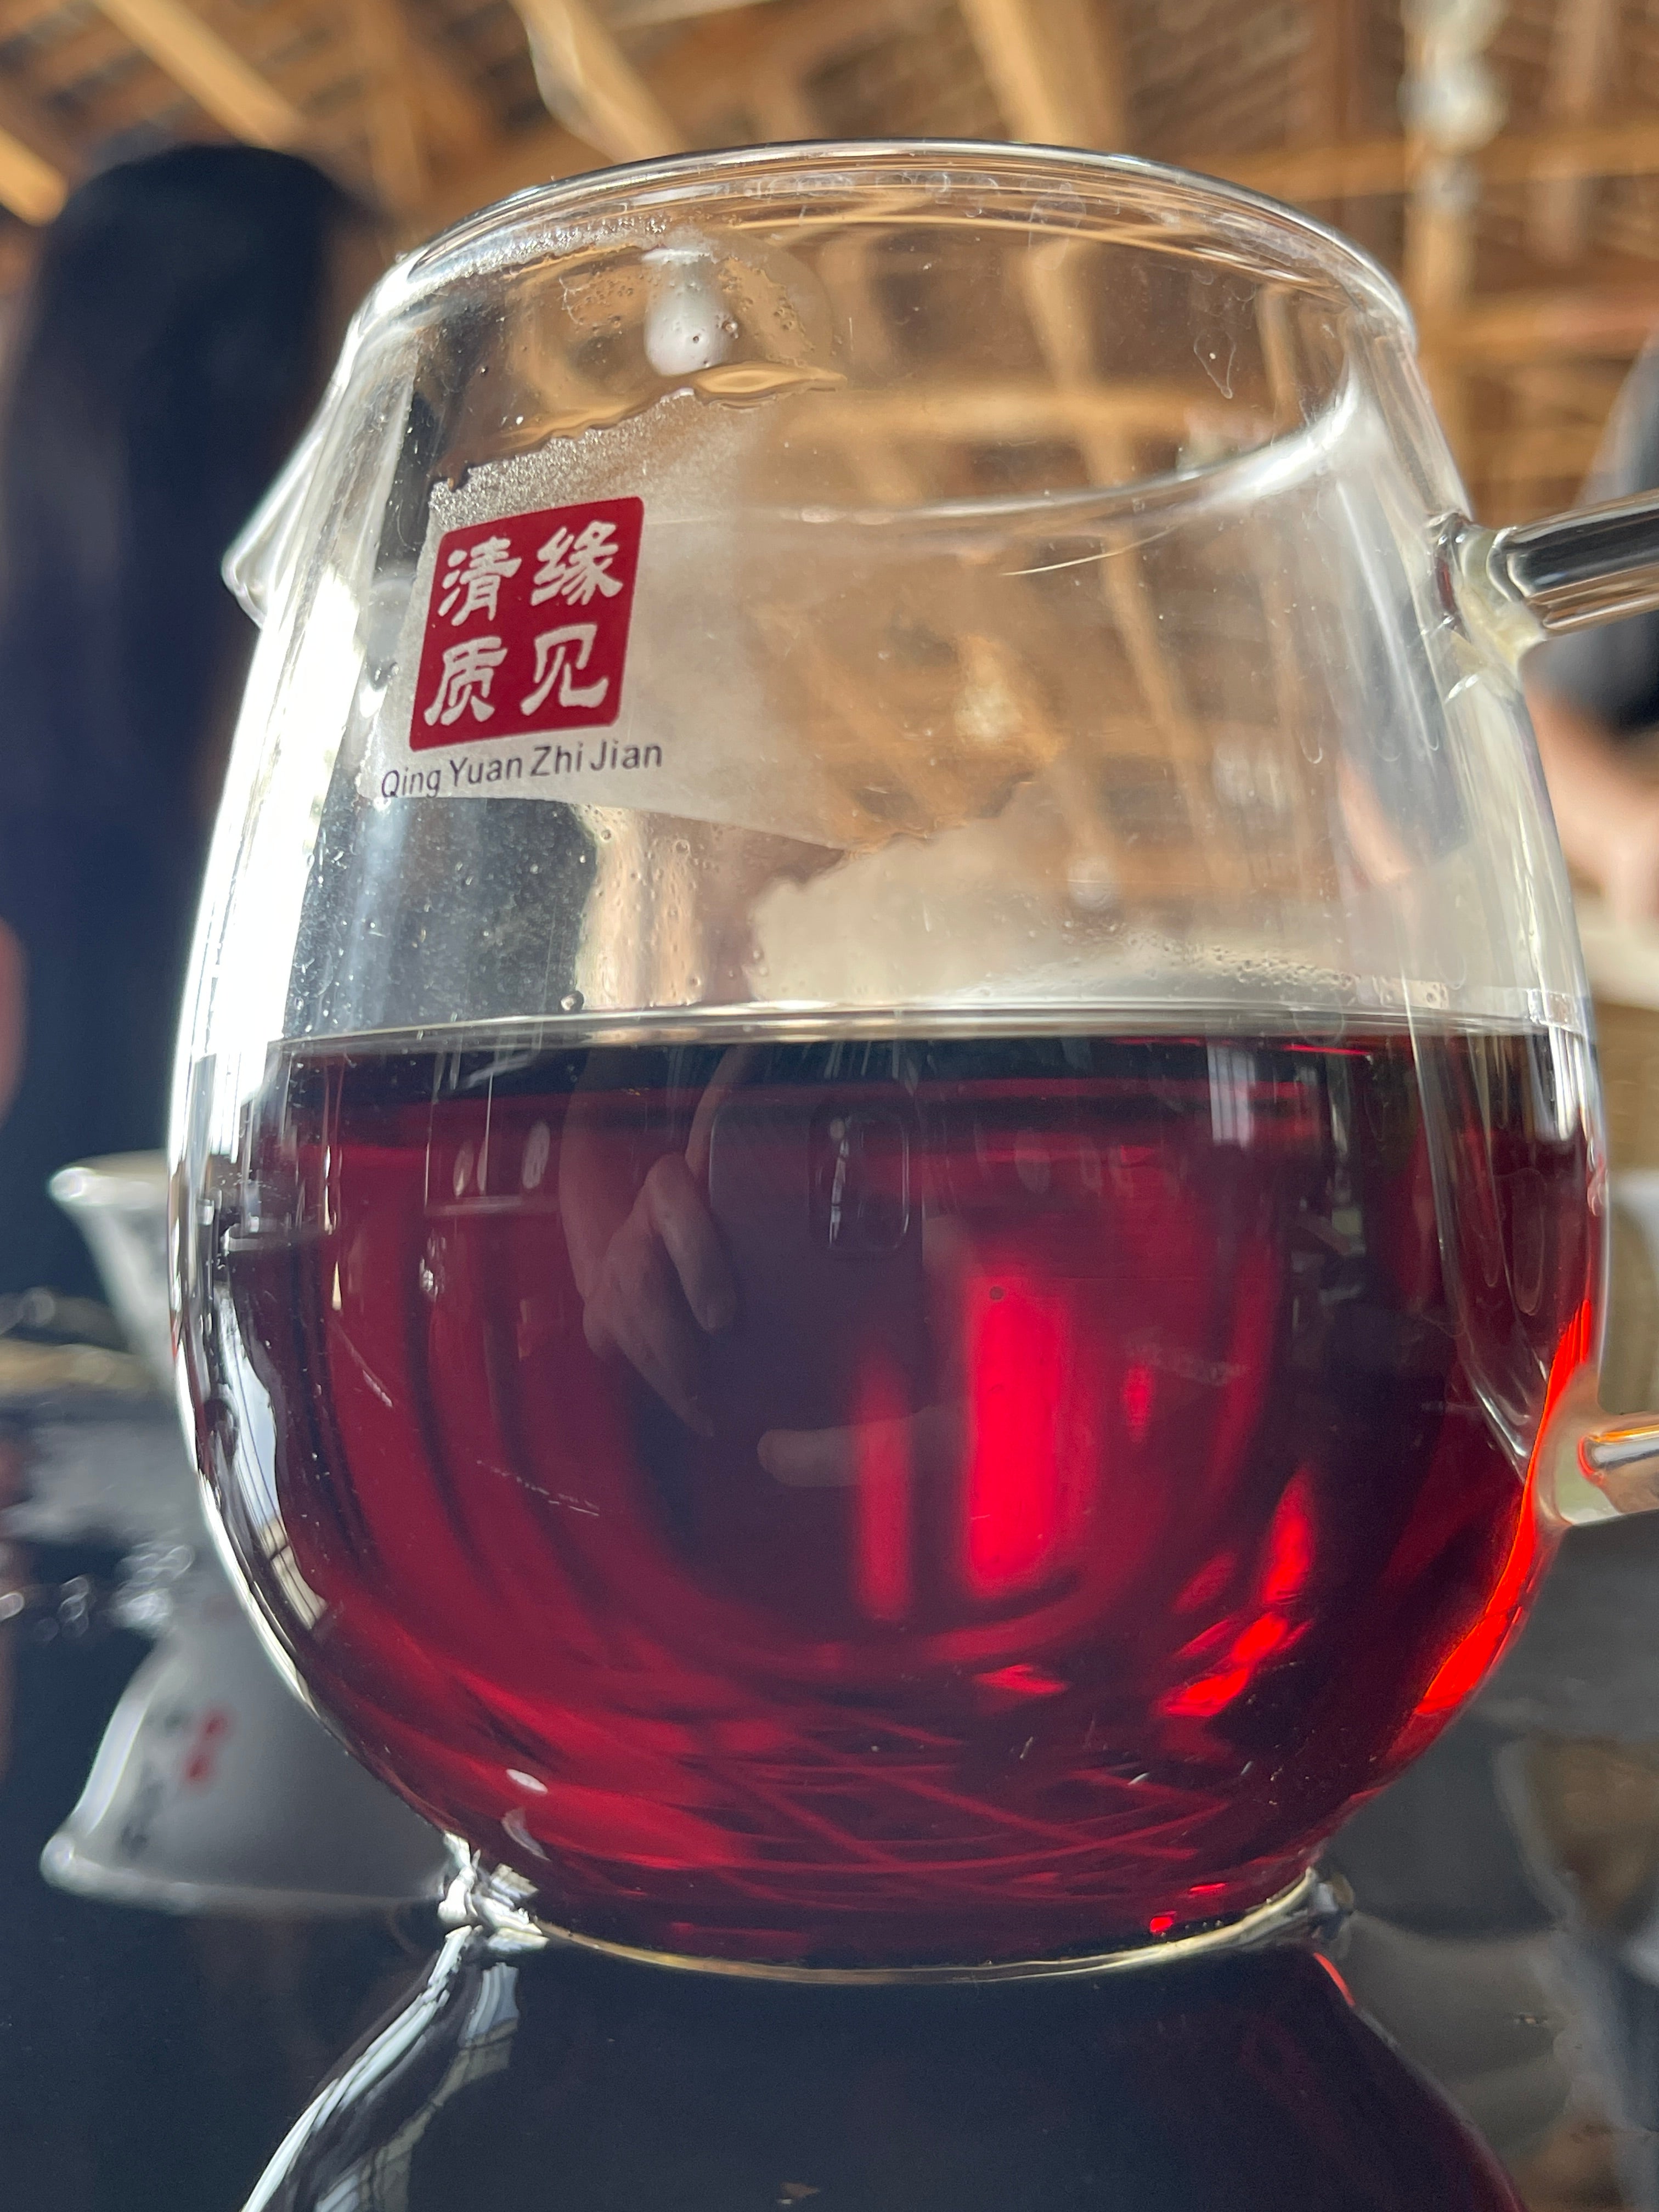 Tea resin was invented in ancient China during the 10th century